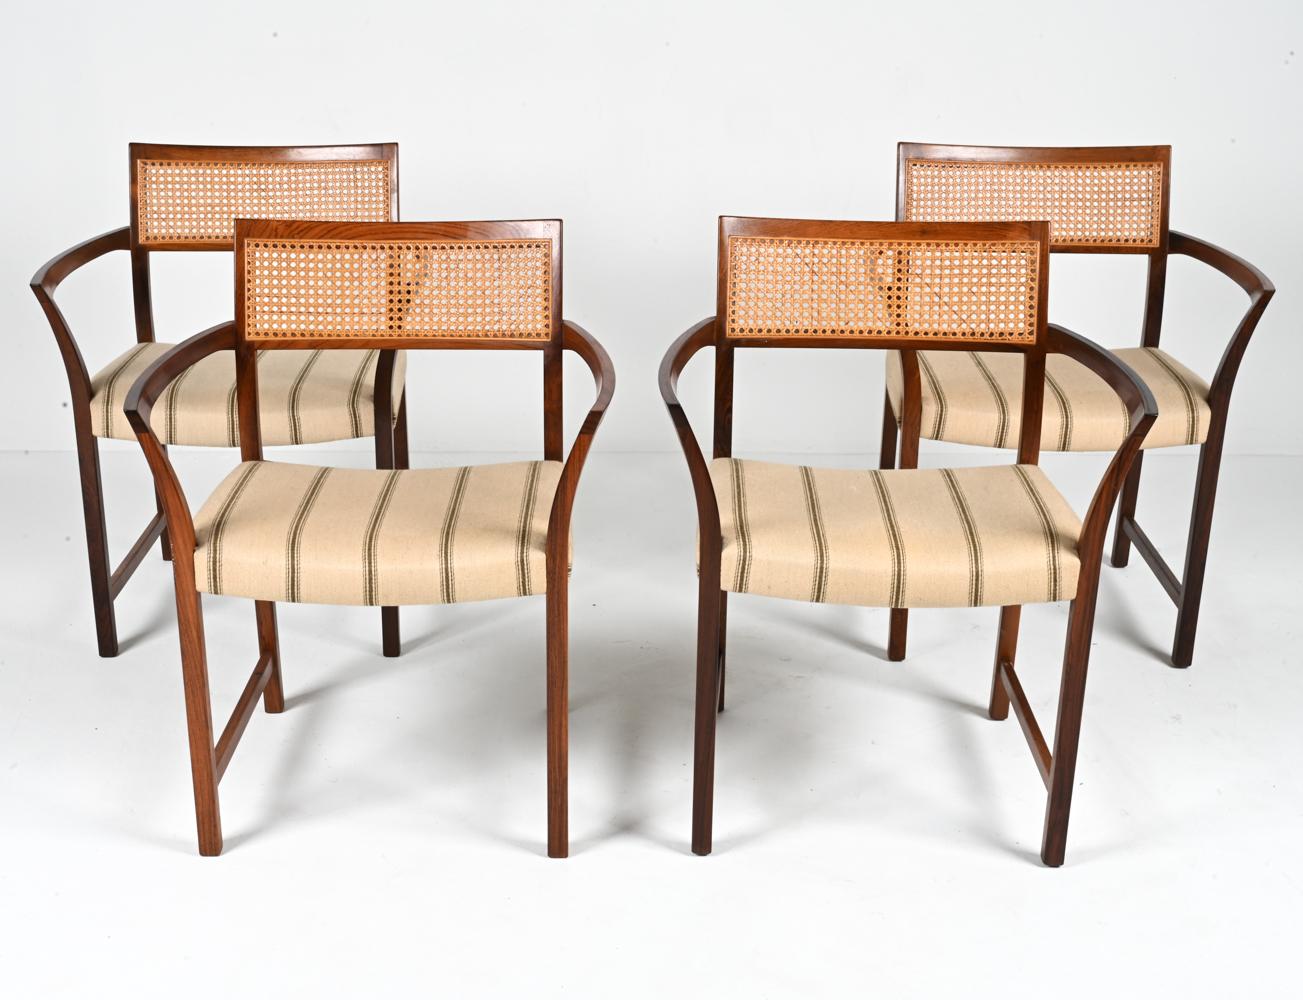 Step into the golden era of design with this exquisite set of four Illum Wikkelsø Danish armchairs from the 1950s. Emanating sophistication and the quintessential elegance of Mid-Century Modern aesthetics, these chairs are a rare find for the